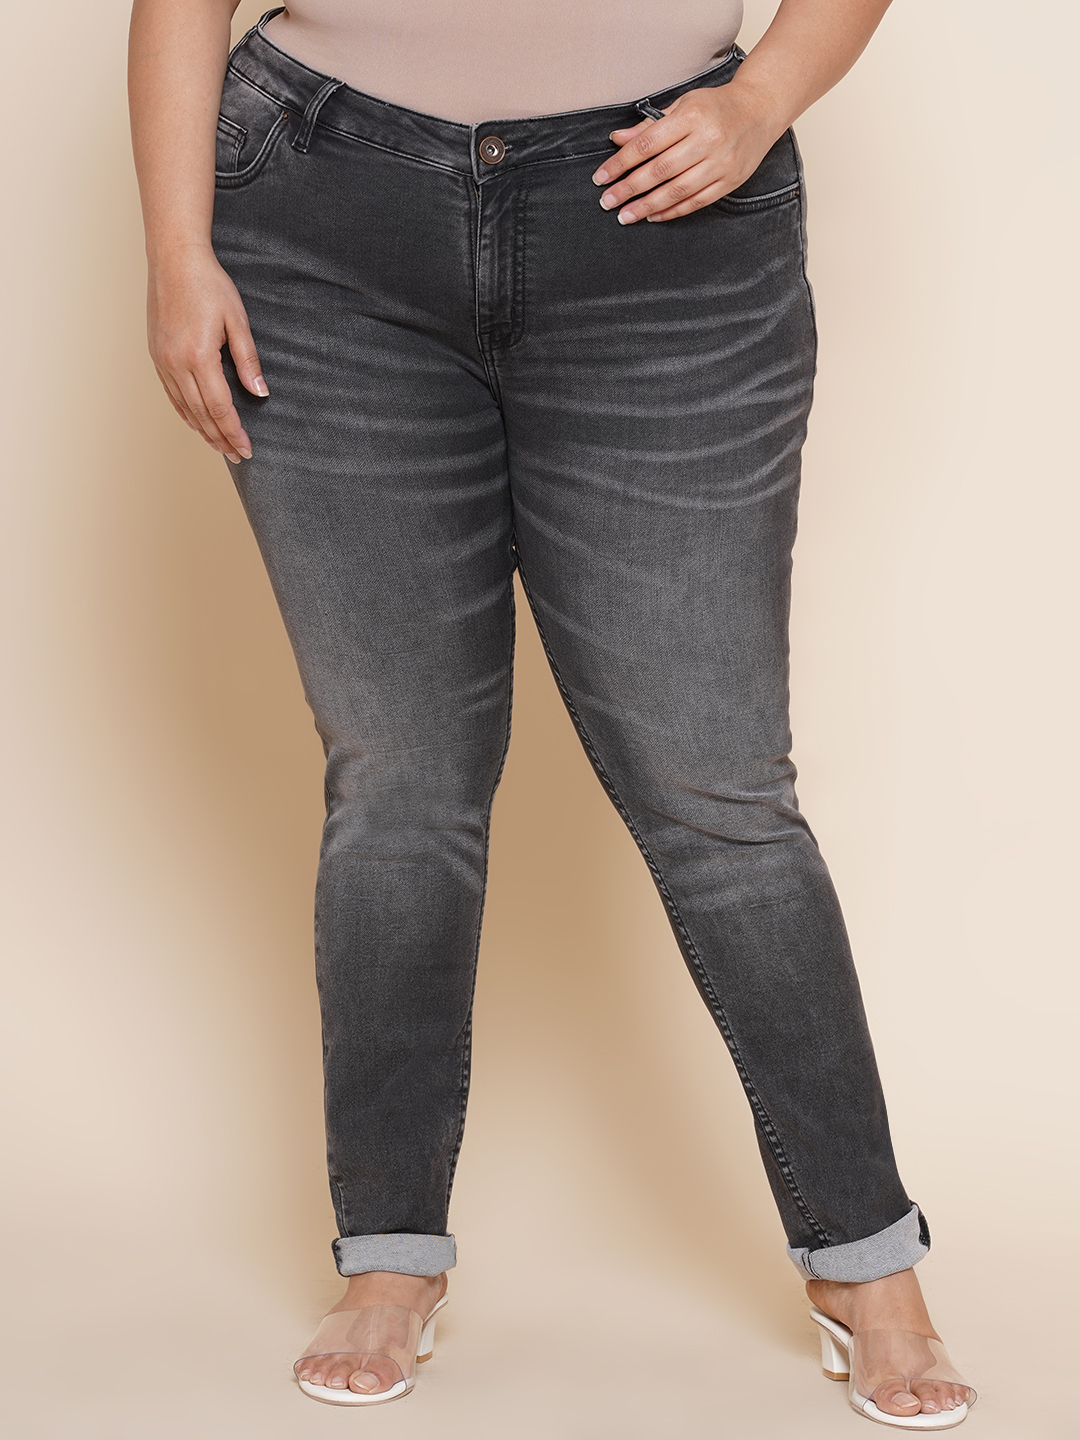 Charcoal Stretchable Jeans